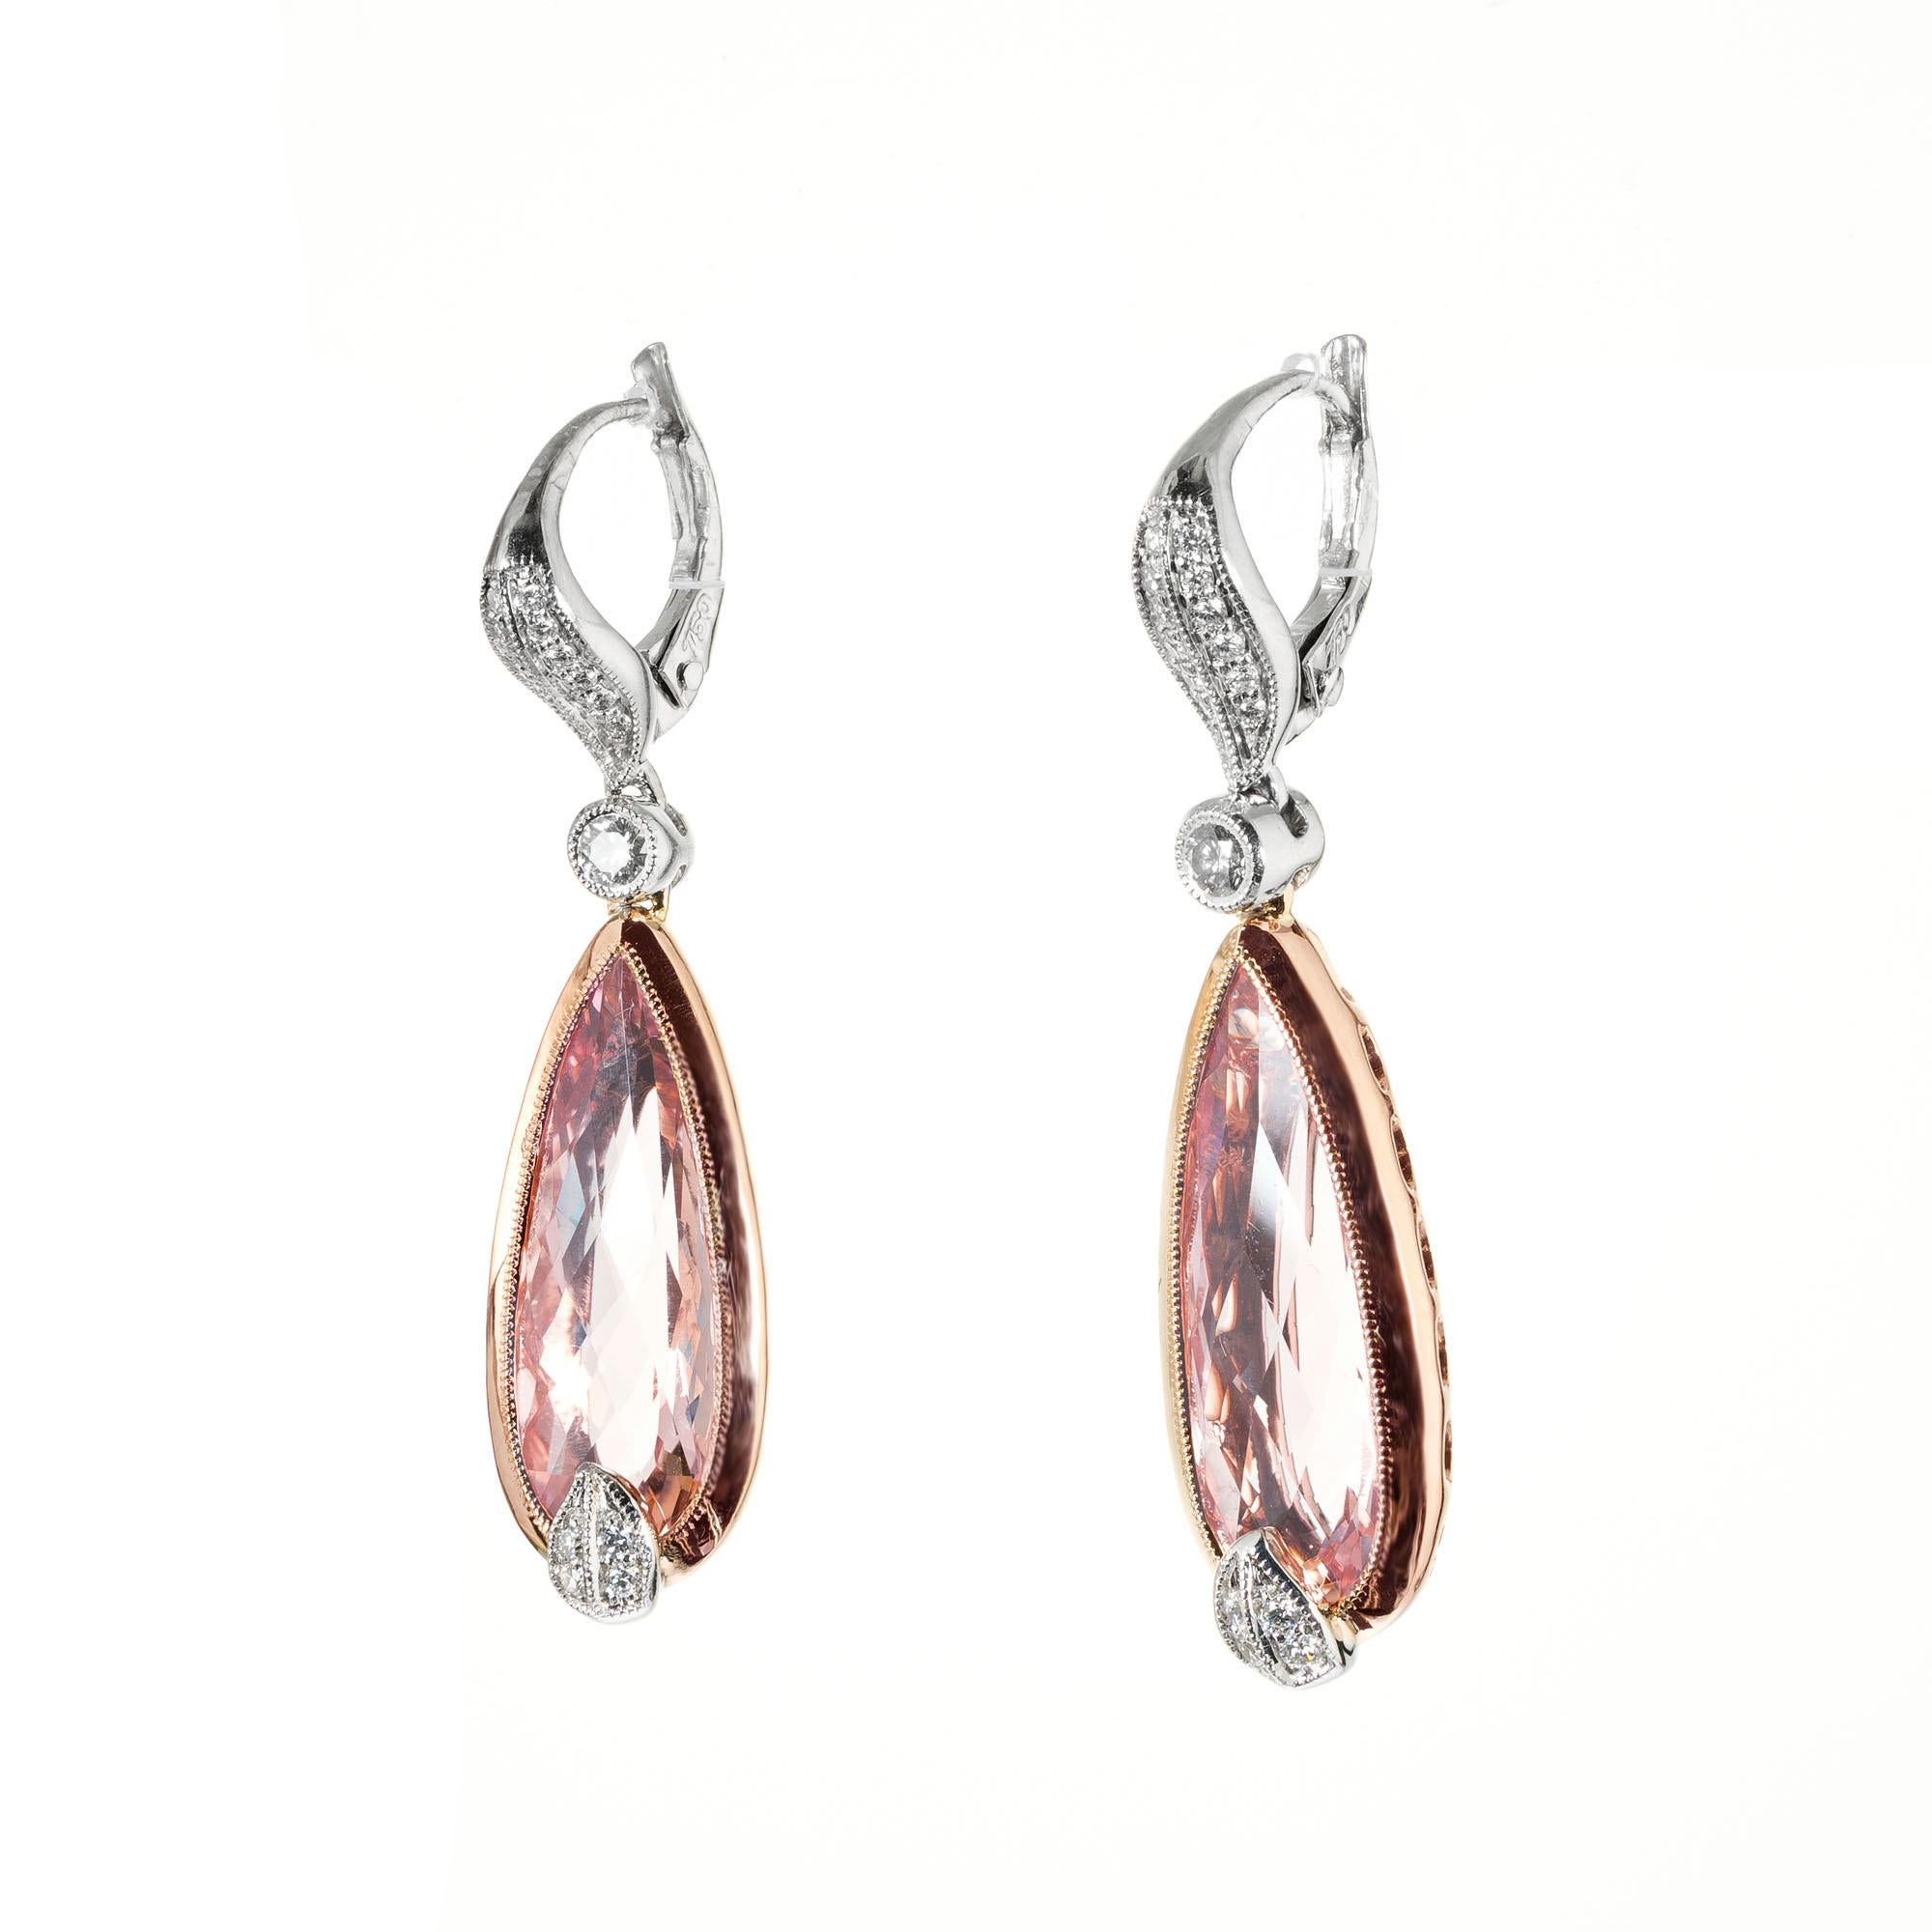 Morganite and diamond dangle earrings. 2 pear shaped morganites set in 18k rose gold bezels accented with 34 round brilliant cut diamonds set in 18k white gold. Designed and crafted in the Peter Suchy workshop.

2 pear shaped pink morganite, approx.